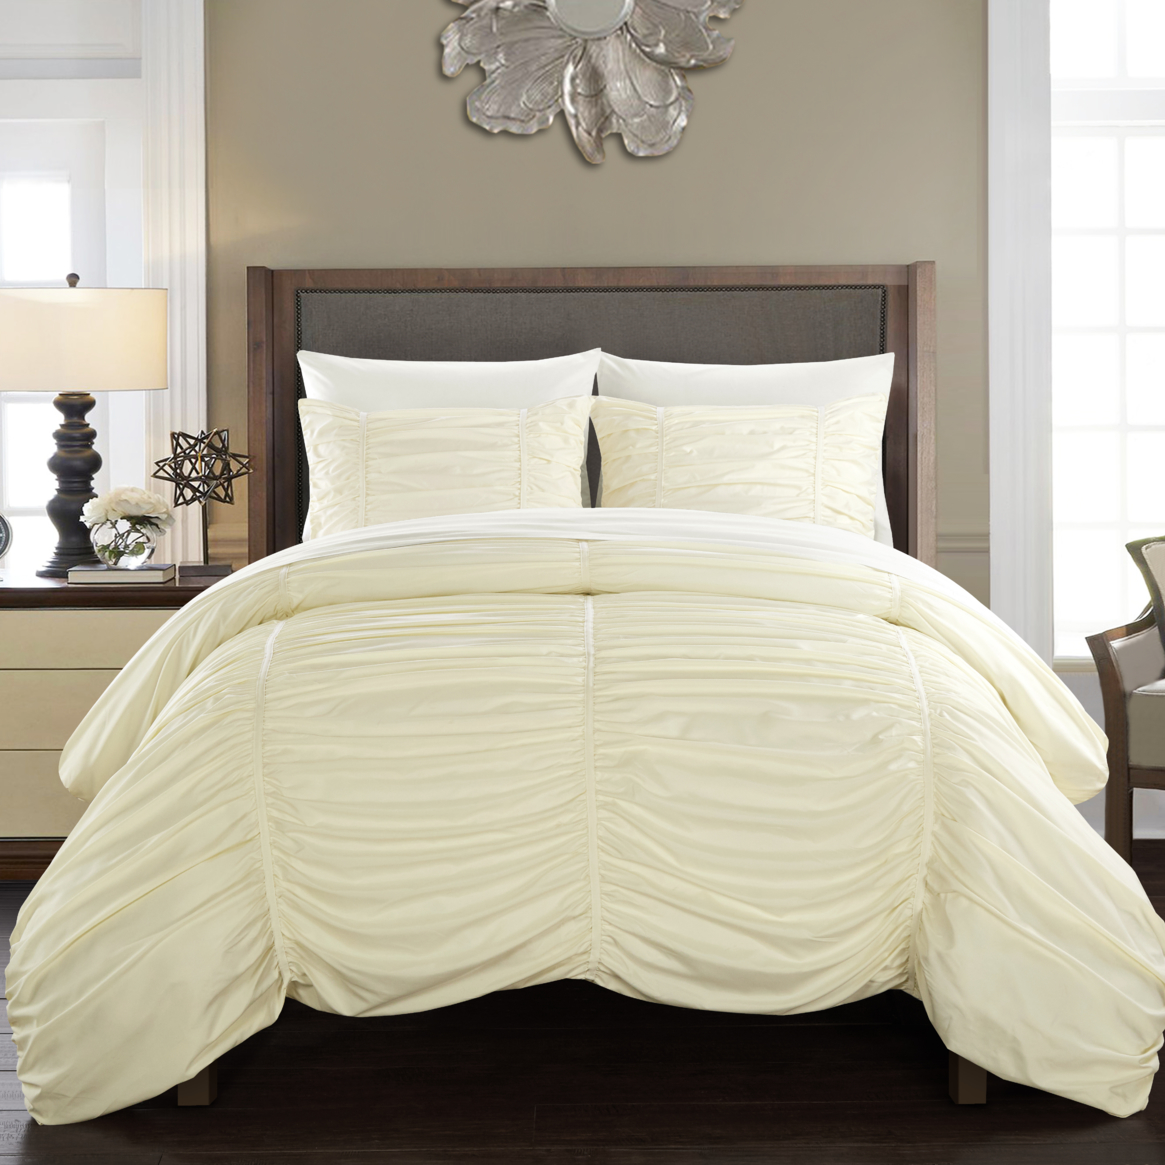 Kleia 7 Or 5 Piece Comforter Set Contemporary Striped Ruched Ruffled Design Bed In A Bag - White, King